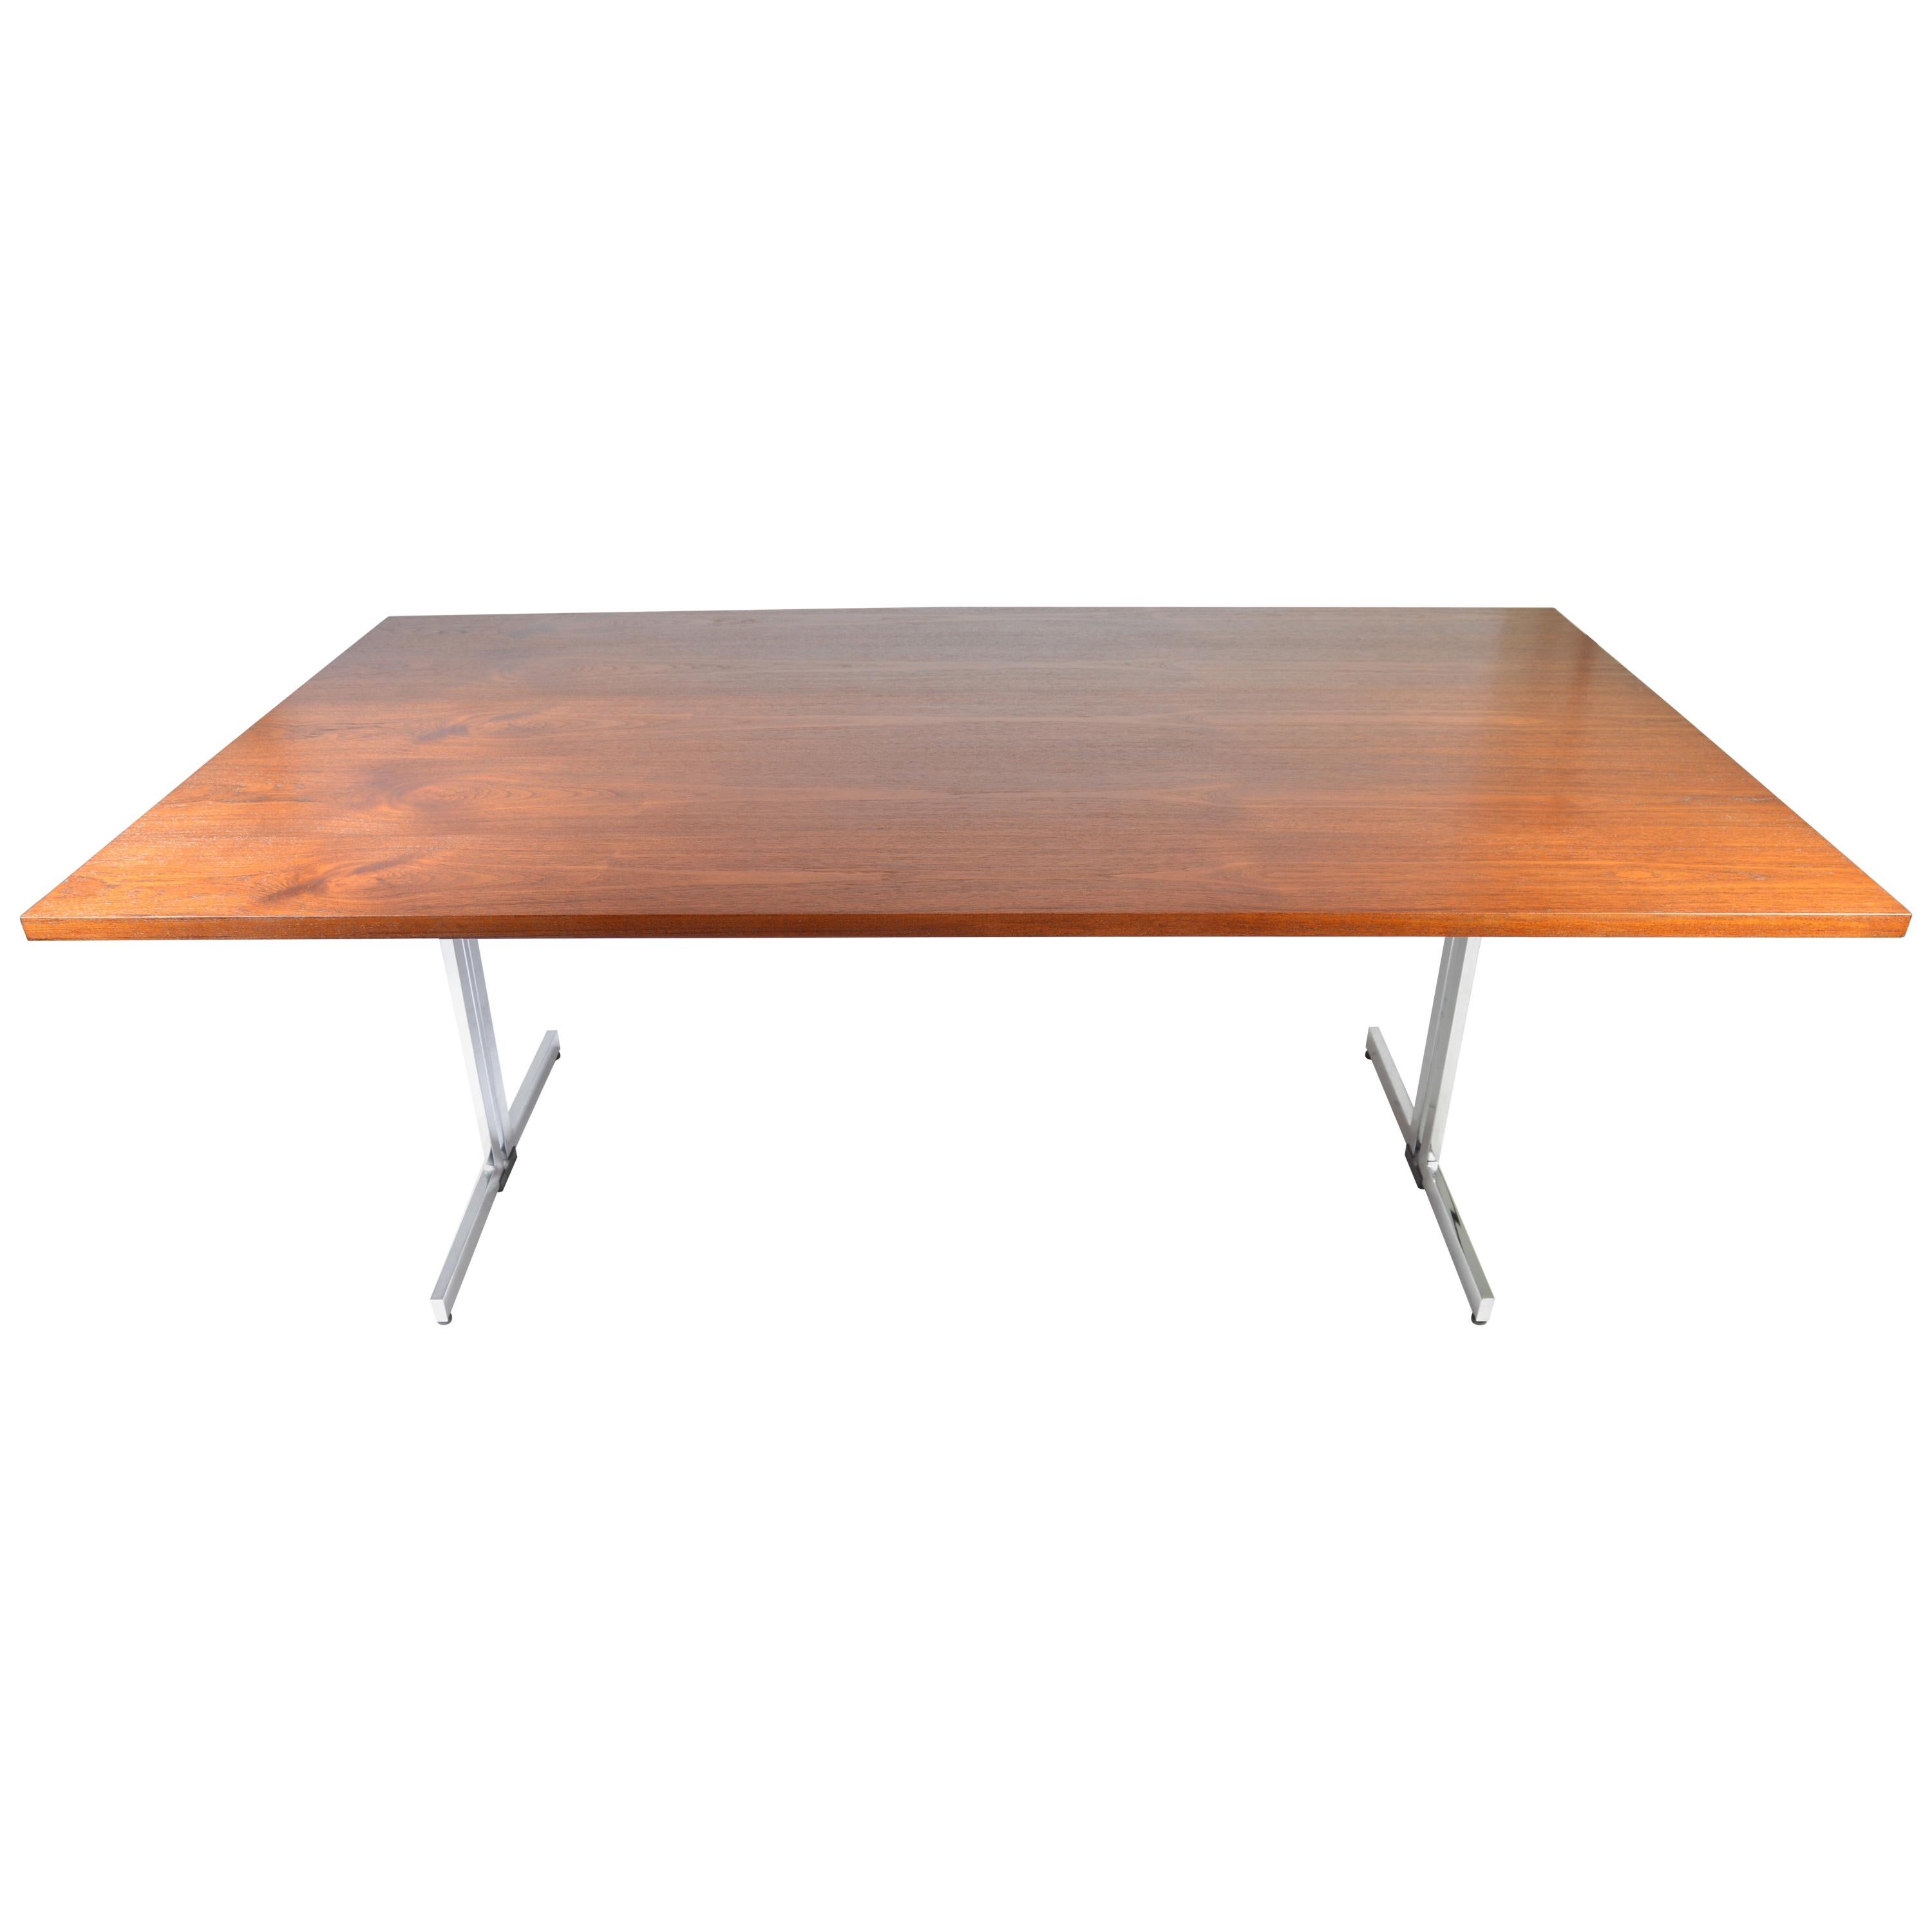 Midcentury Executive Desk Or Table Attributed To Walter Knoll